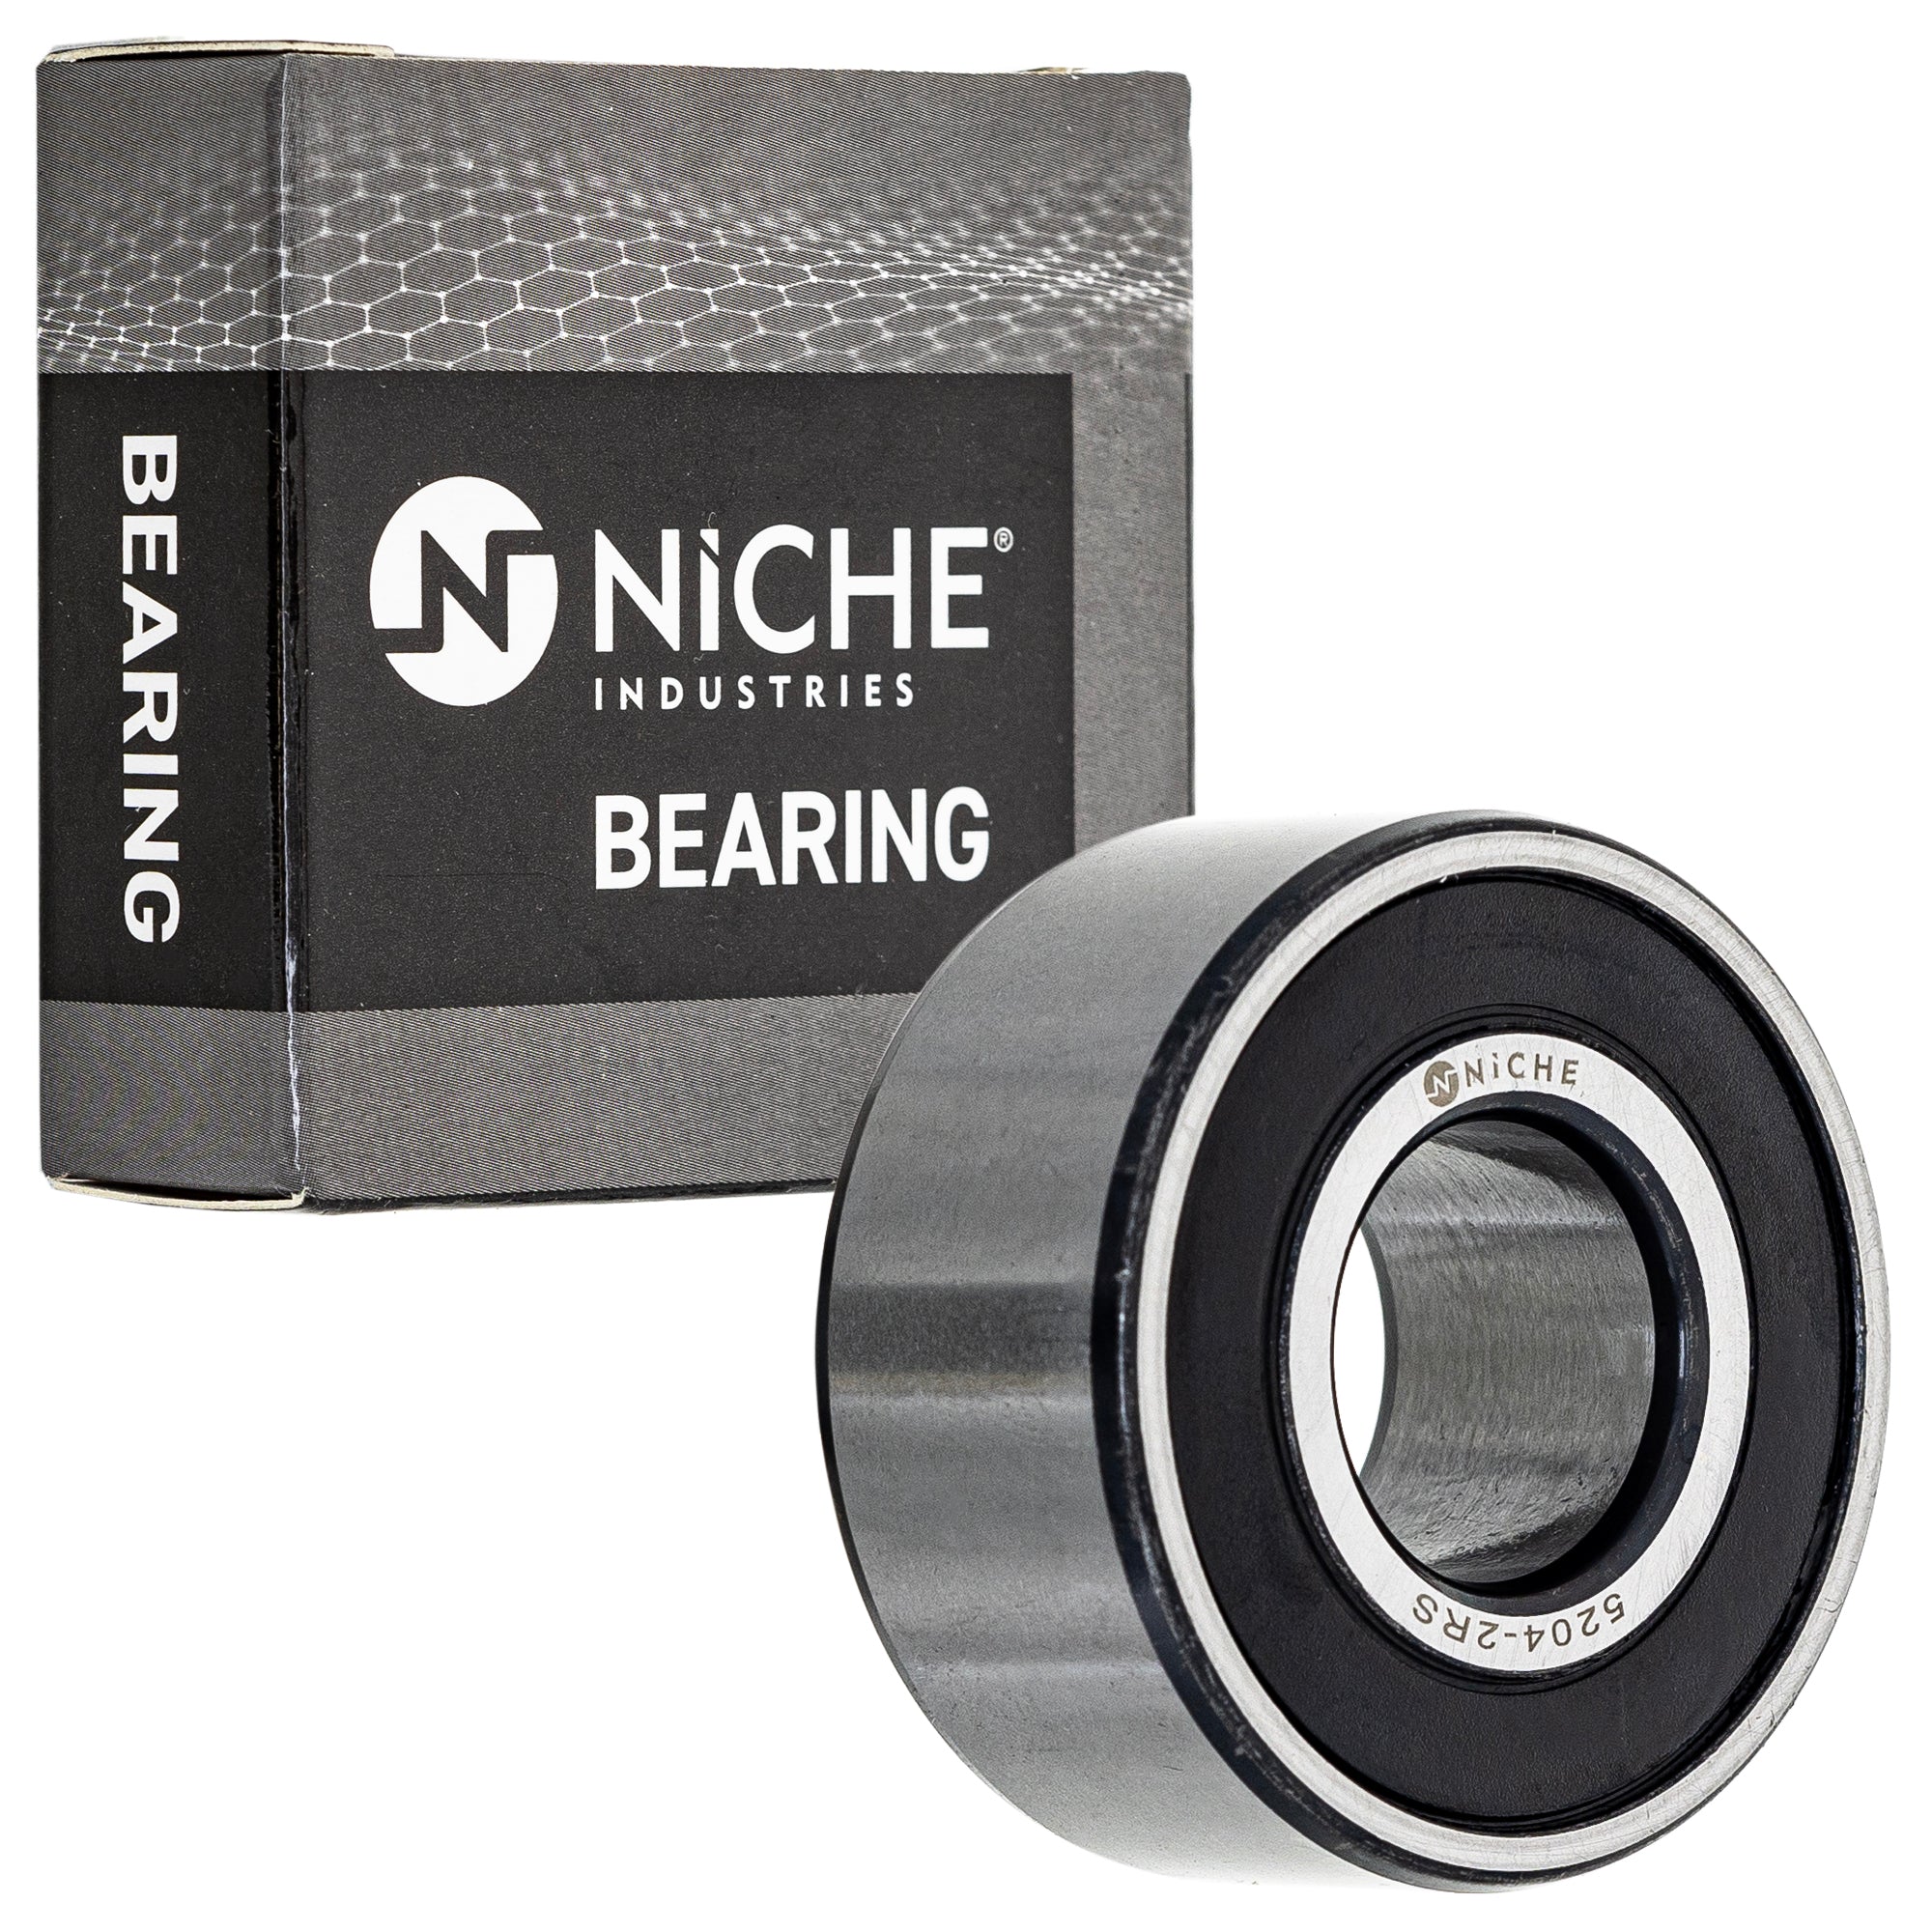 NICHE 519-CBB2260R Bearing & Seal Kit 10-Pack for zOTHER VTX1800T3